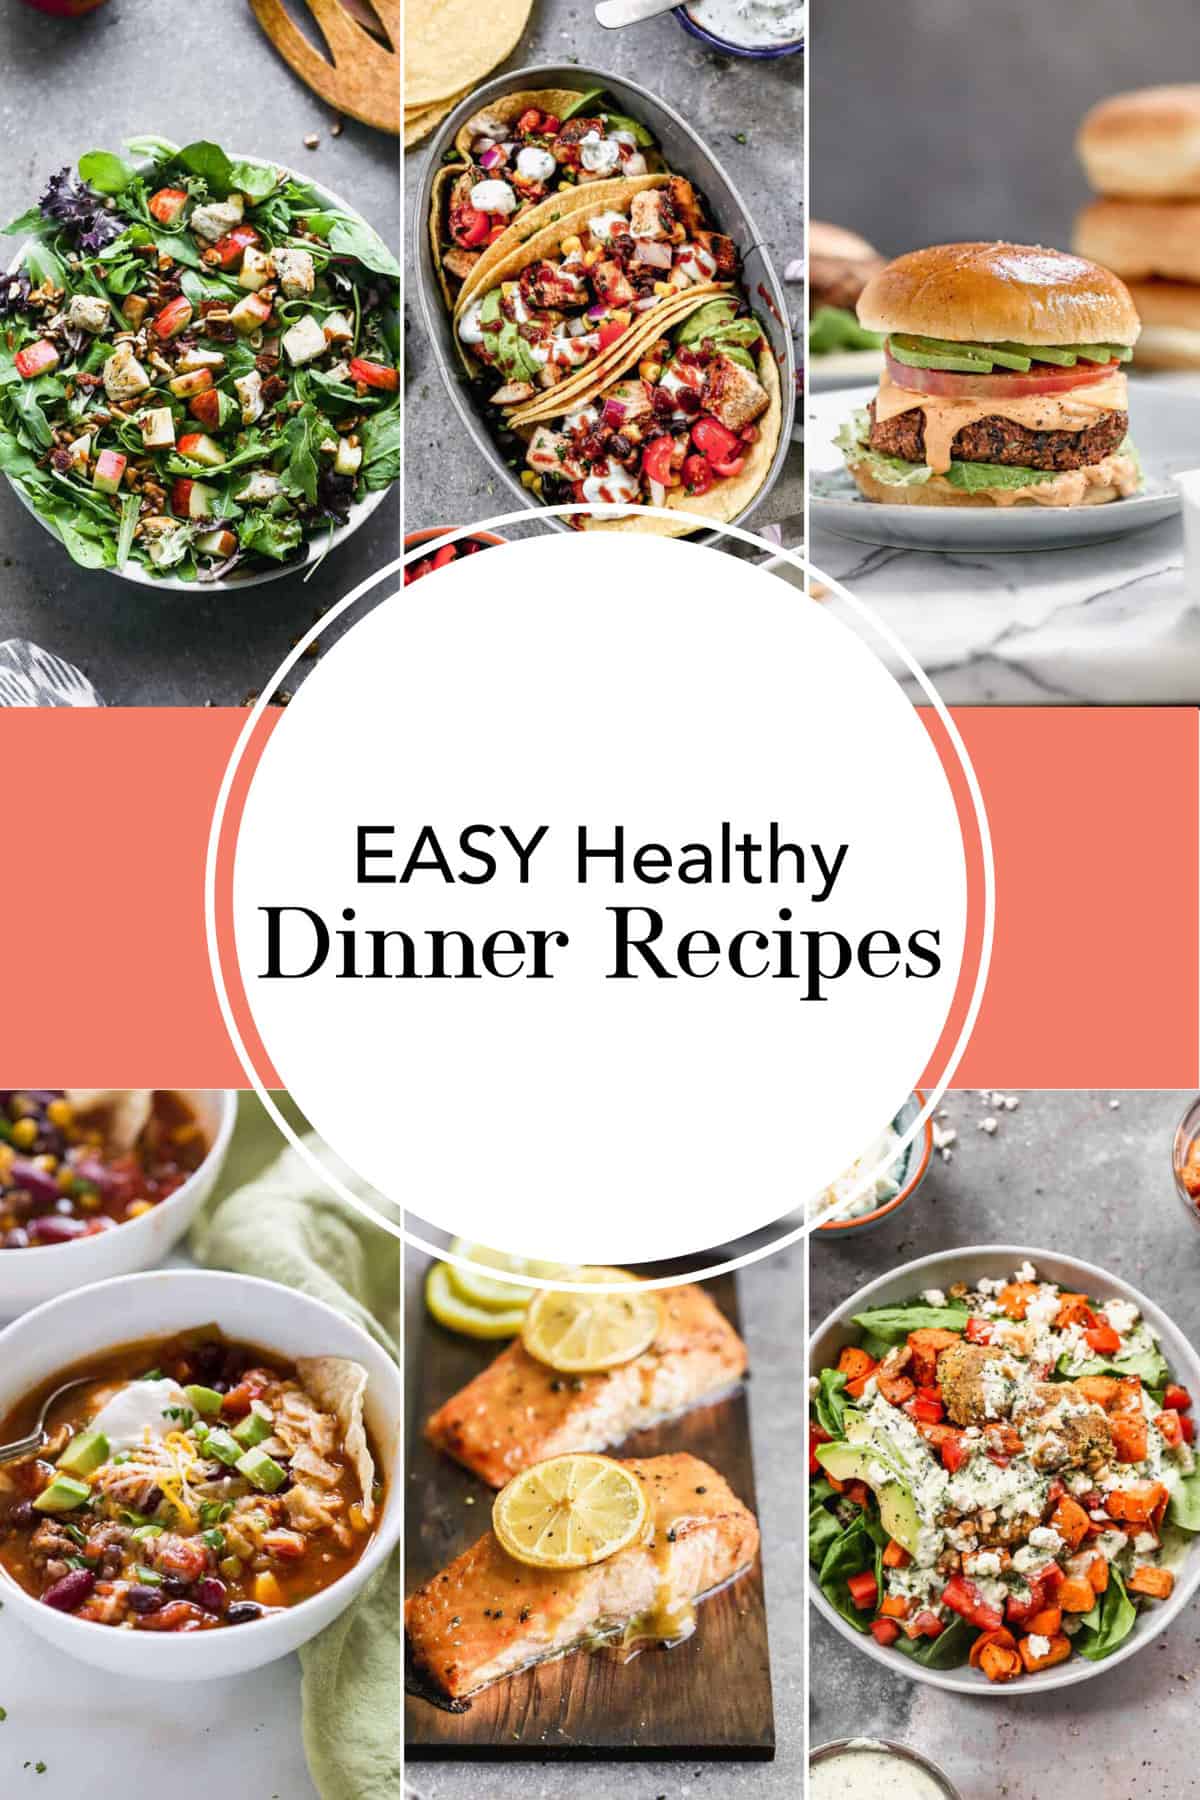 A collage image of healthy dinner ideas.